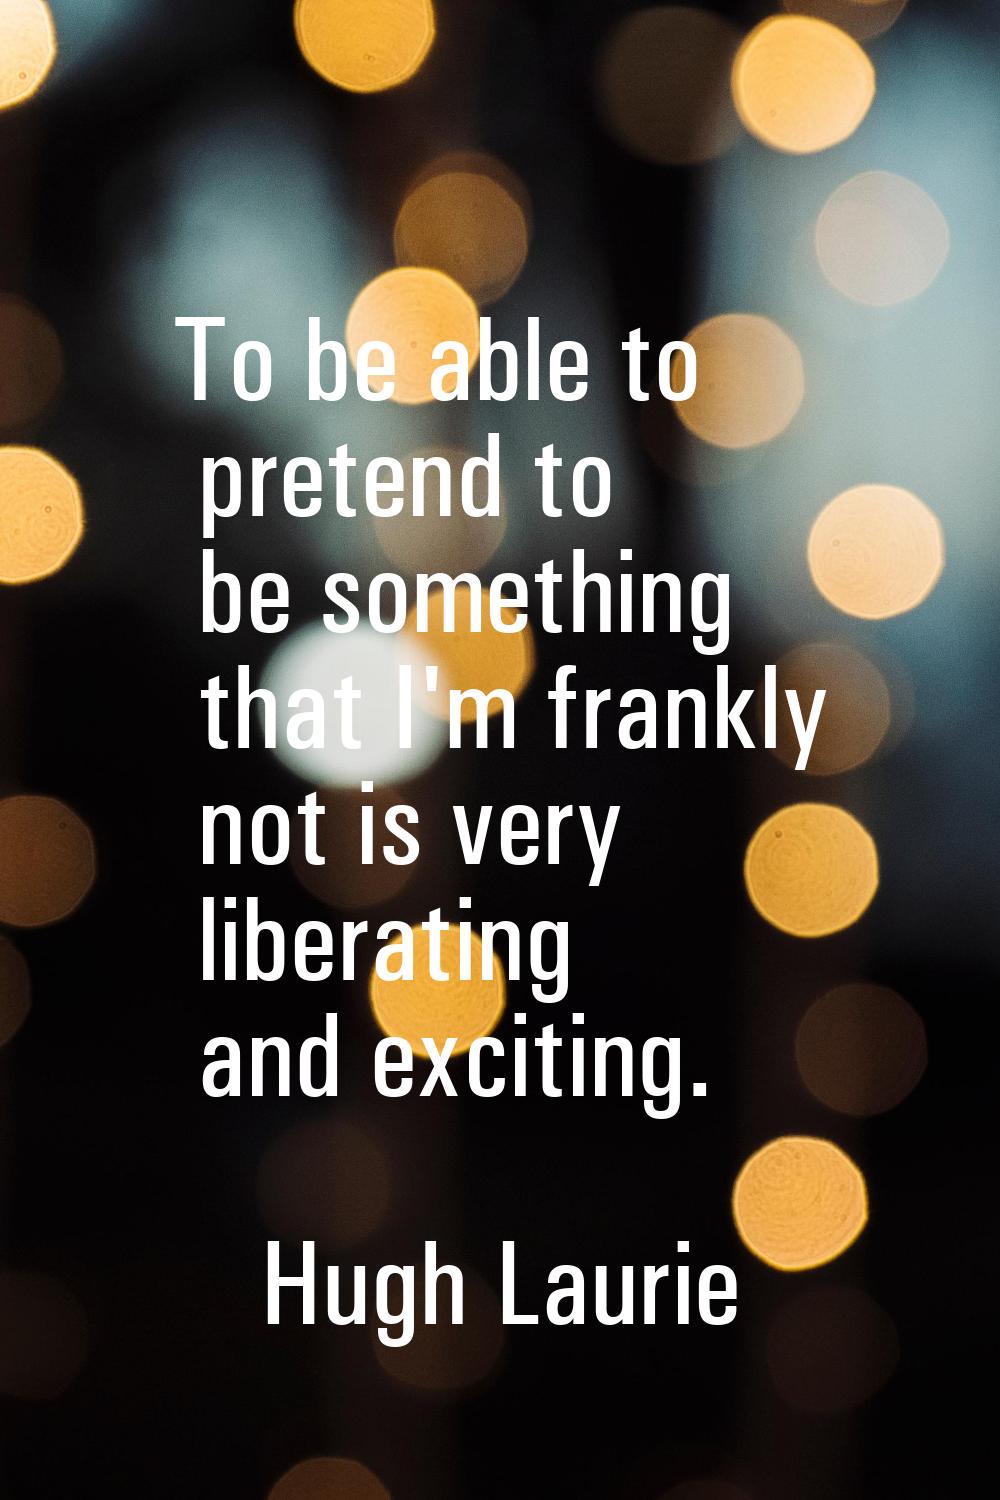 To be able to pretend to be something that I'm frankly not is very liberating and exciting.